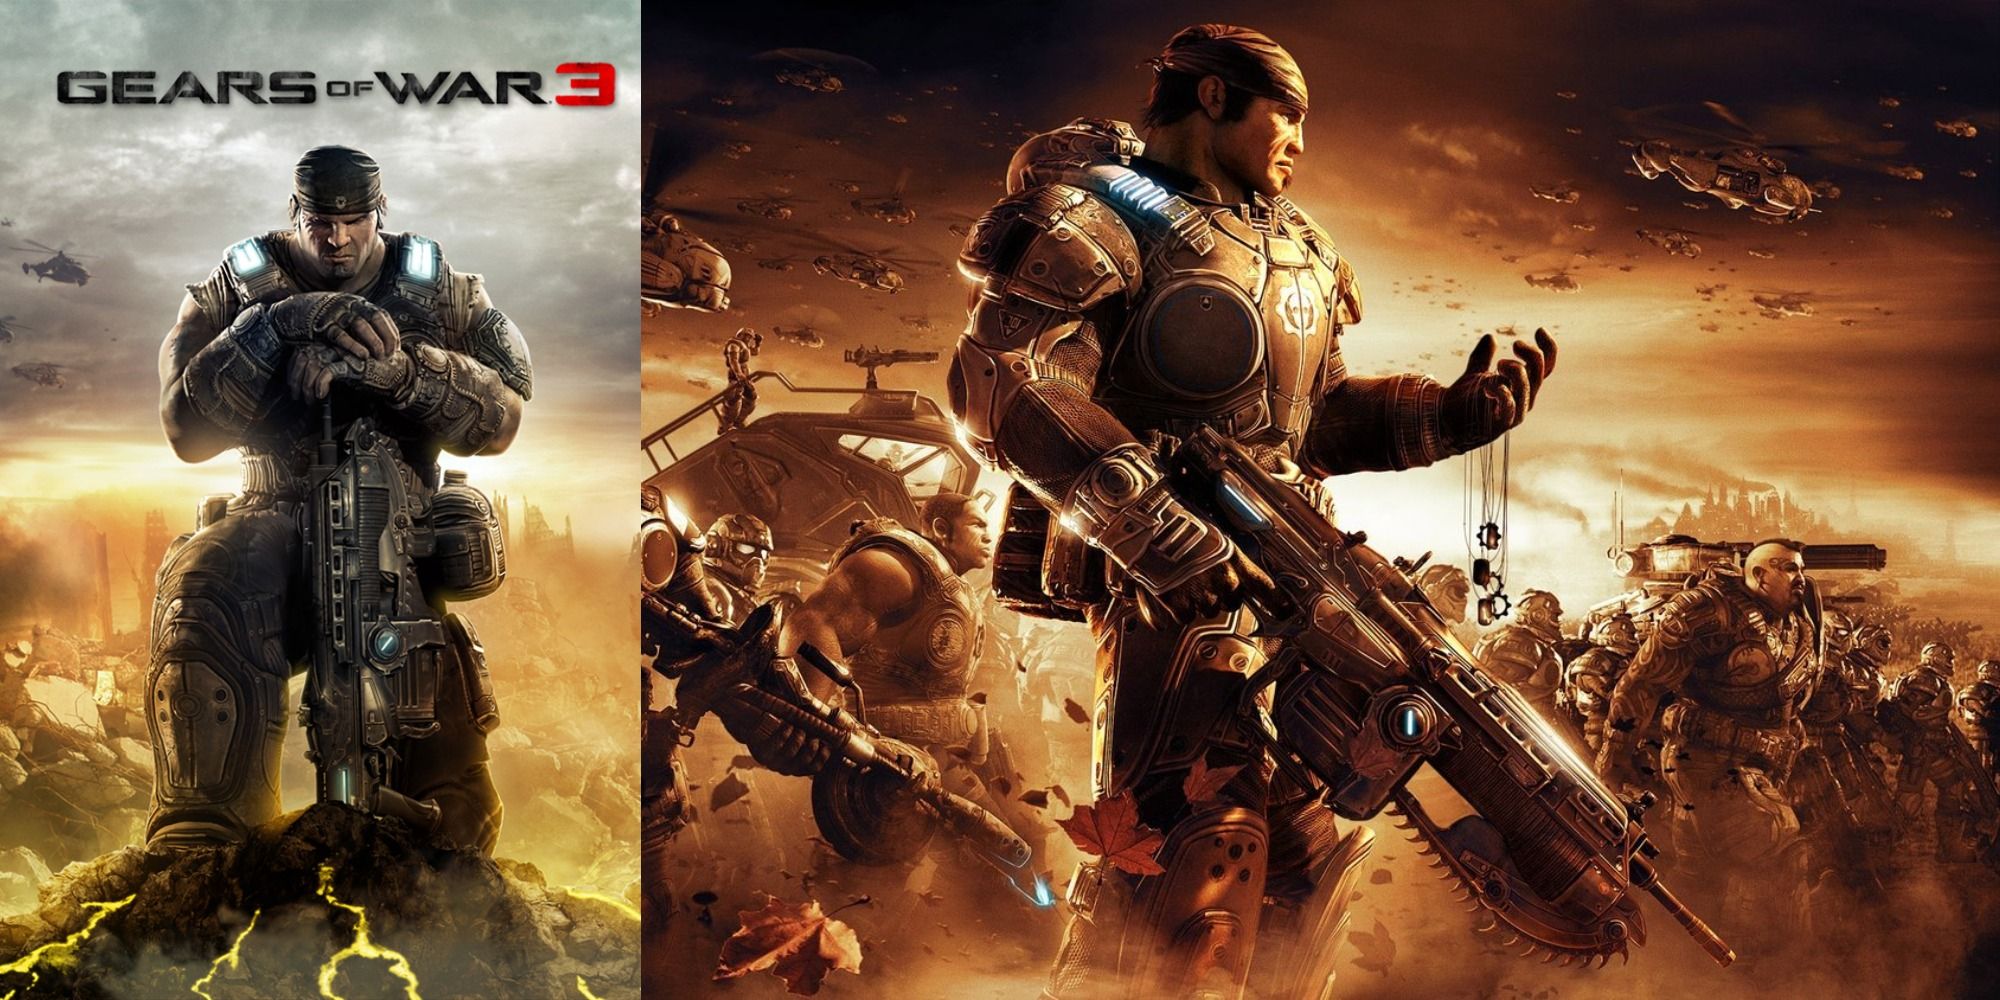 Gears of war 3 poster and main character ready for a battle